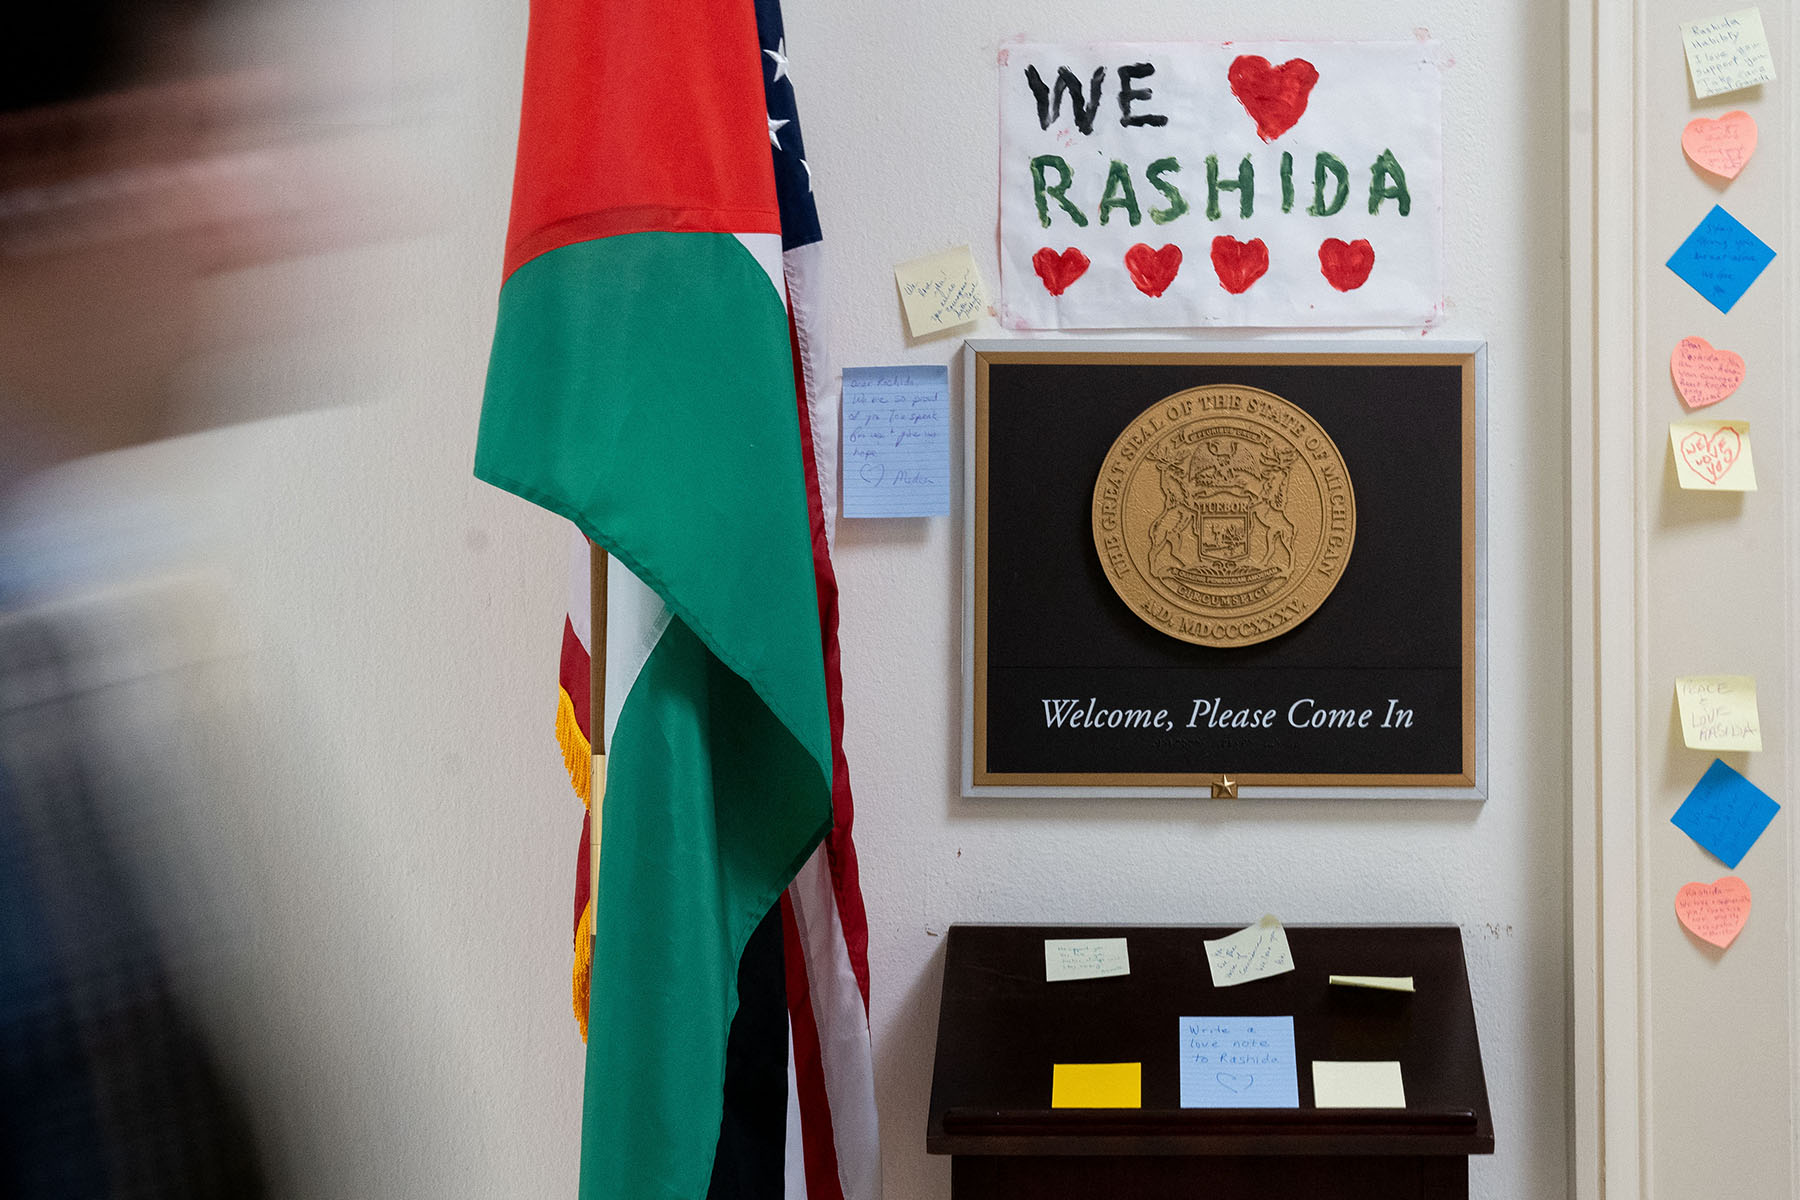 A person walks past signs and notes left outside the office of Rep. Rashida Tlaib. One reads "We heart RASHIDA."